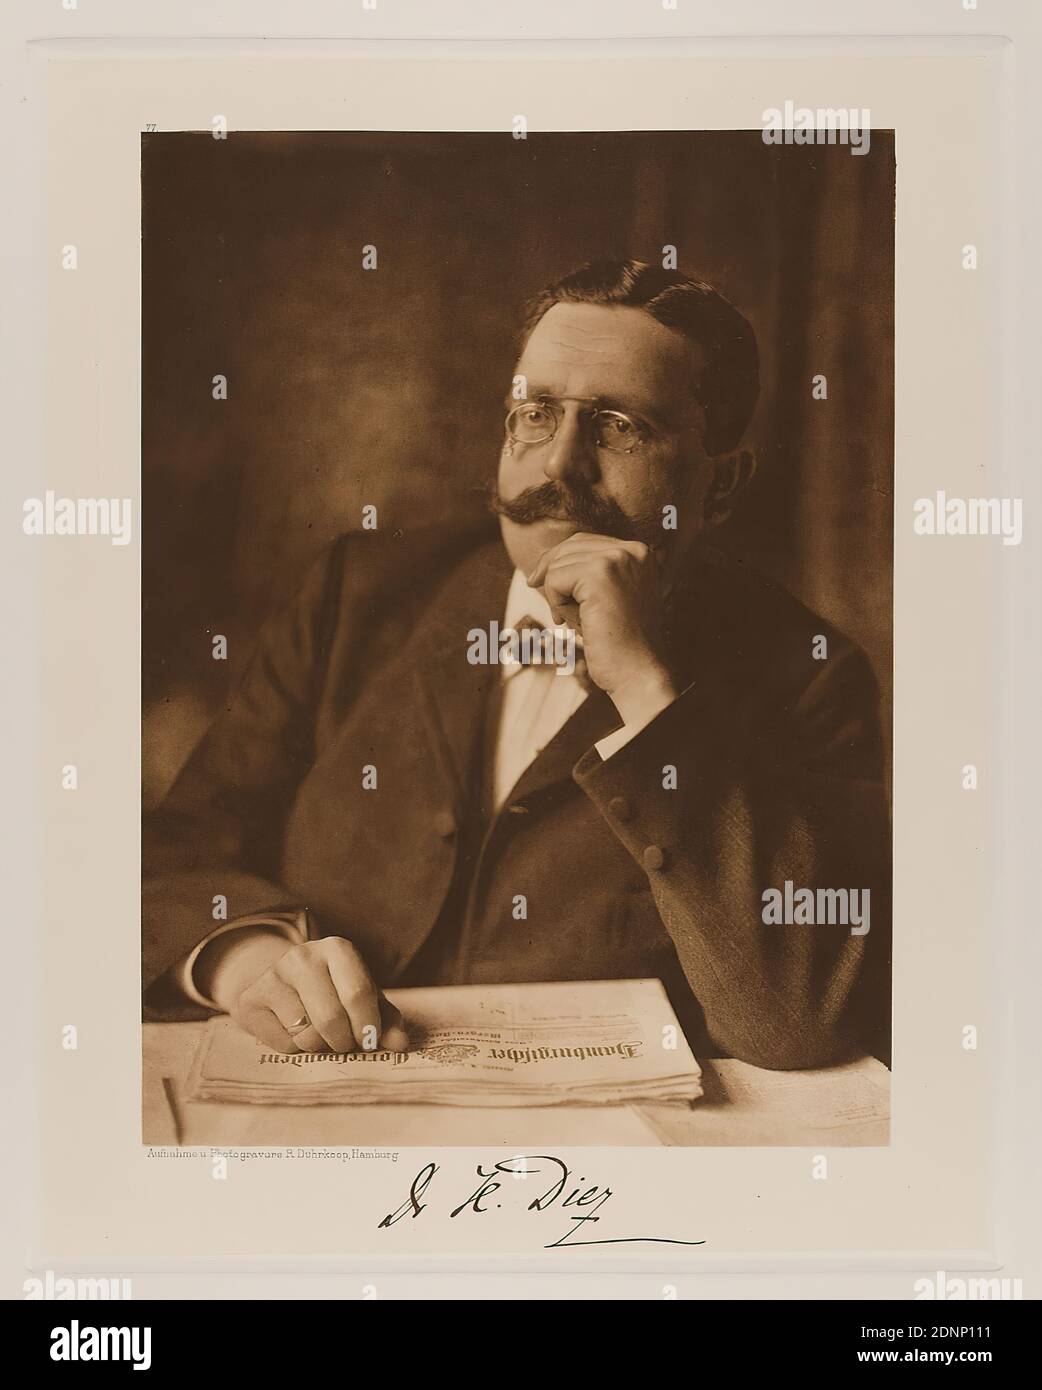 Rudolph Dührkoop, Dr. H. Diez, Editor-in-Chief of the Hamburgischer Correspondent from the portfolio Hamburgische Männer und Frauen am Anfang des XX. Century, Staatliche Landesbildstelle Hamburg, collection on the history of photography, paper, heliogravure, picture size: Height: 22 cm; width: 16,3 cm, signed: recto below the picture: Exposed signature of the sitter, inscribed: recto: engraved on printing plate, below the picture: photograph and photogravure R. Dührkoop, Hamburg, top left above picture 77; top right in the corner noted in lead:47 Stock Photo